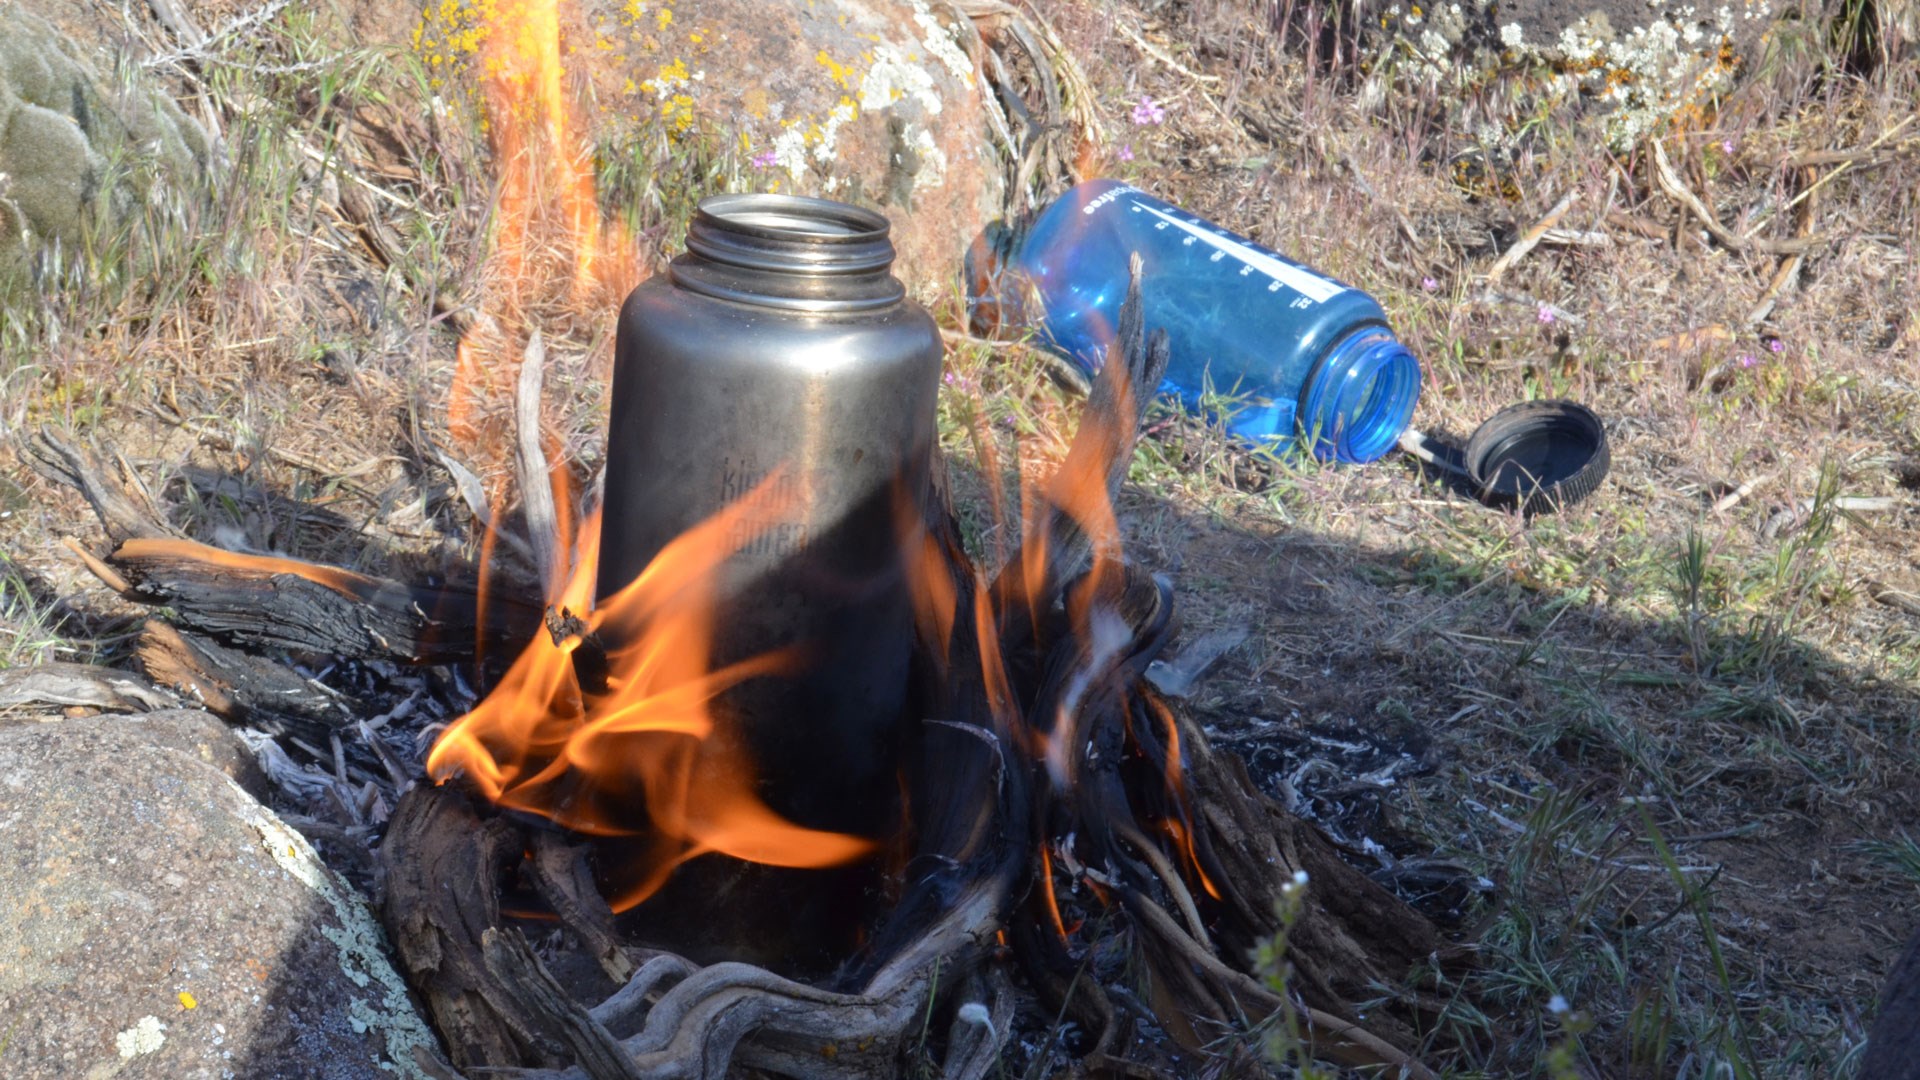 Kanteen on the fire